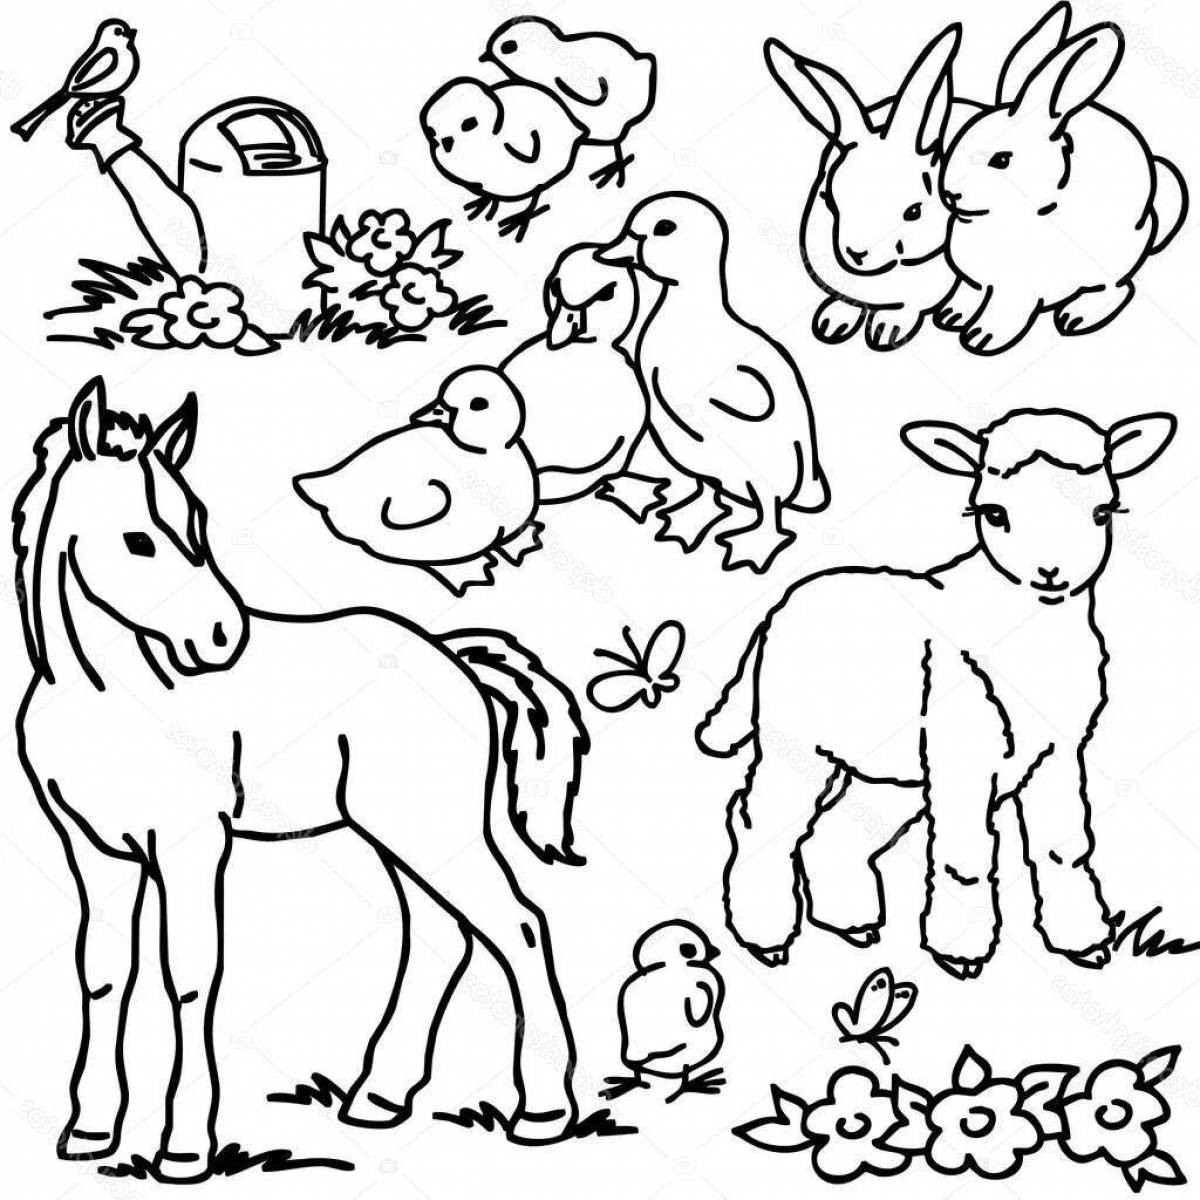 Colourful pets coloring book